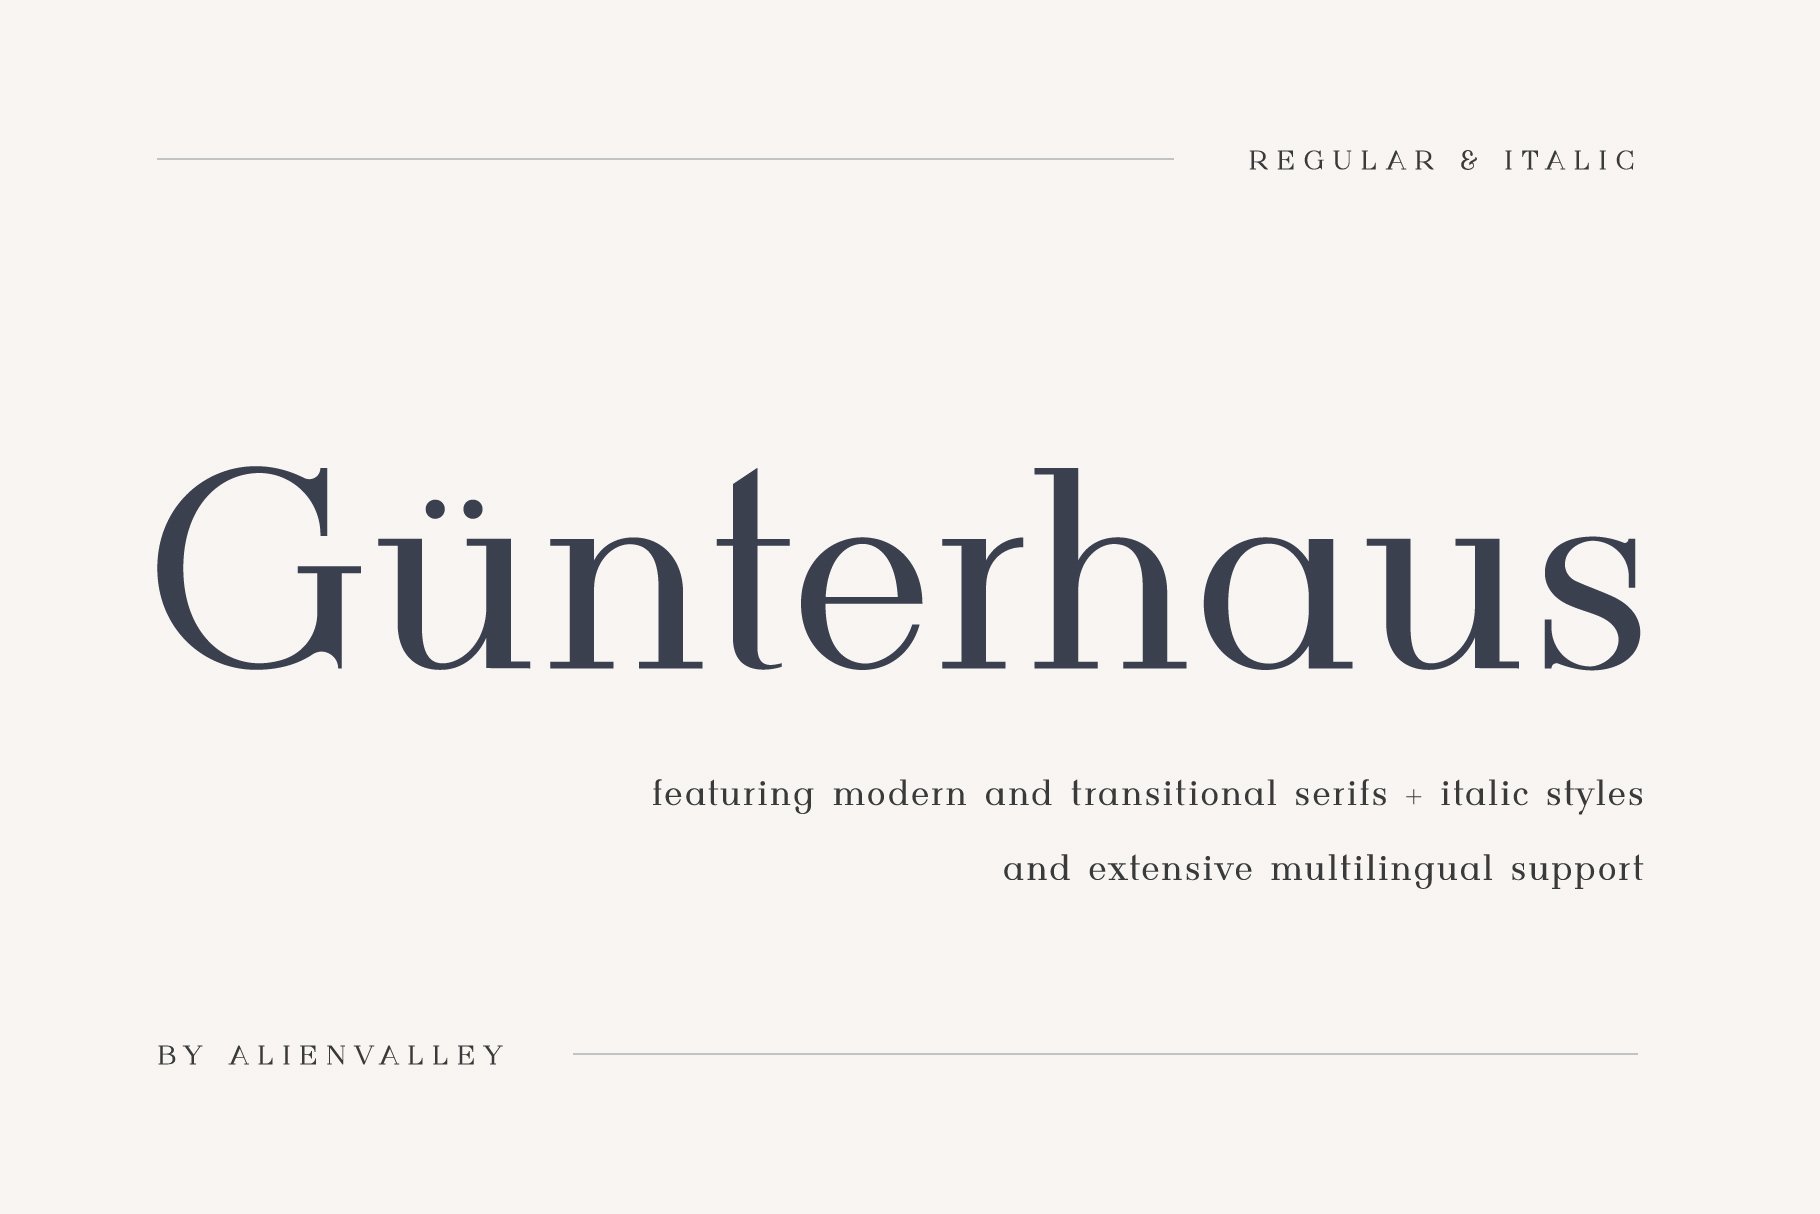 The Greatest Hits Fonts Library For Designers